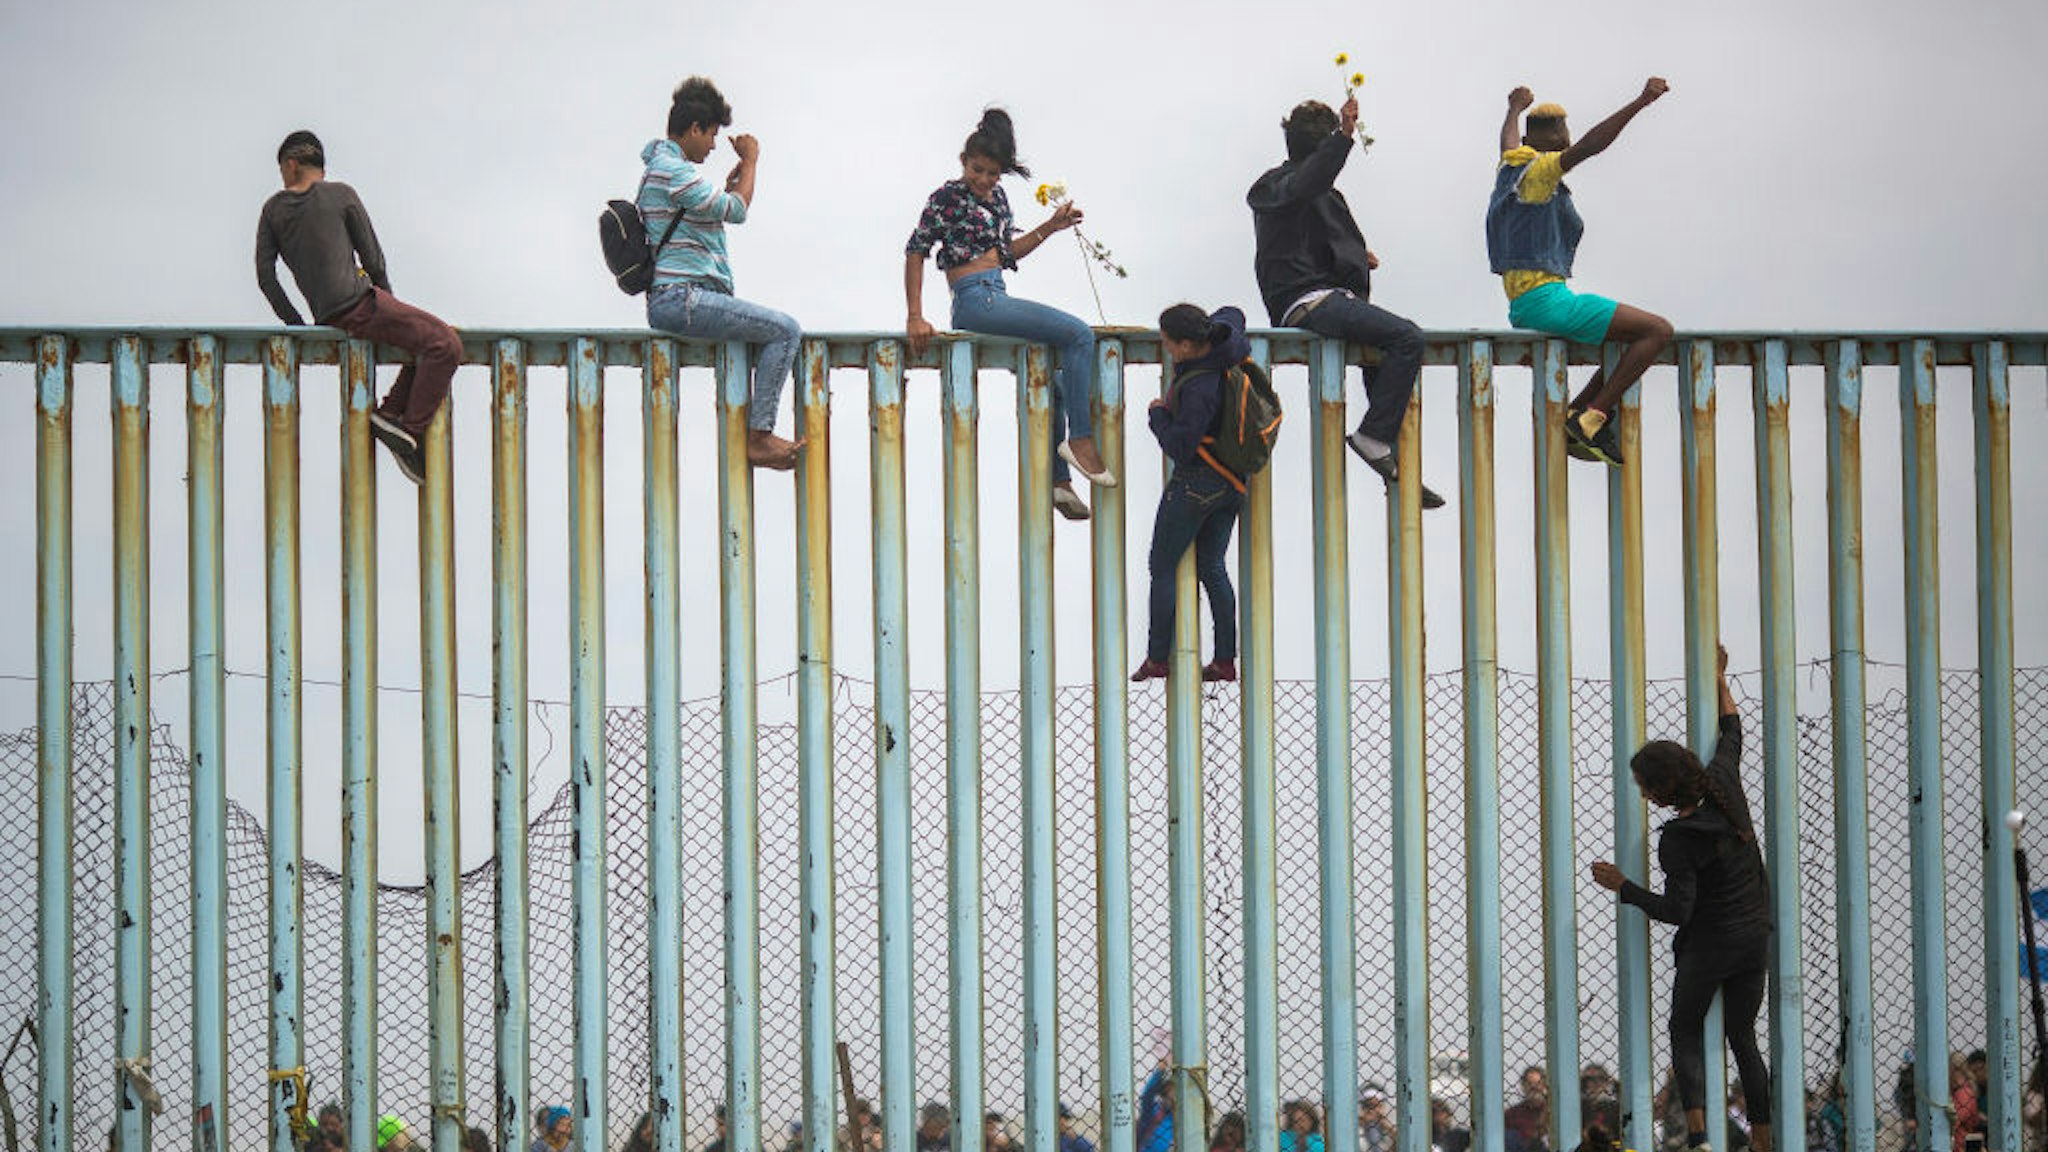 TIJUANA, MEXICO - APRIL 29: People climb a section of border fence to look toward supporters in the U.S. as members of a caravan of Central American asylum seekers arrive to a rally on April 29, 2018 in Tijuana, Baja California Norte, Mexico. More than 300 immigrants, the remnants of a caravan of Central Americans that journeyed across Mexico to ask for asylum in the United States, have reached the border to apply for legal entry. (Photo by David McNew/Getty Images)